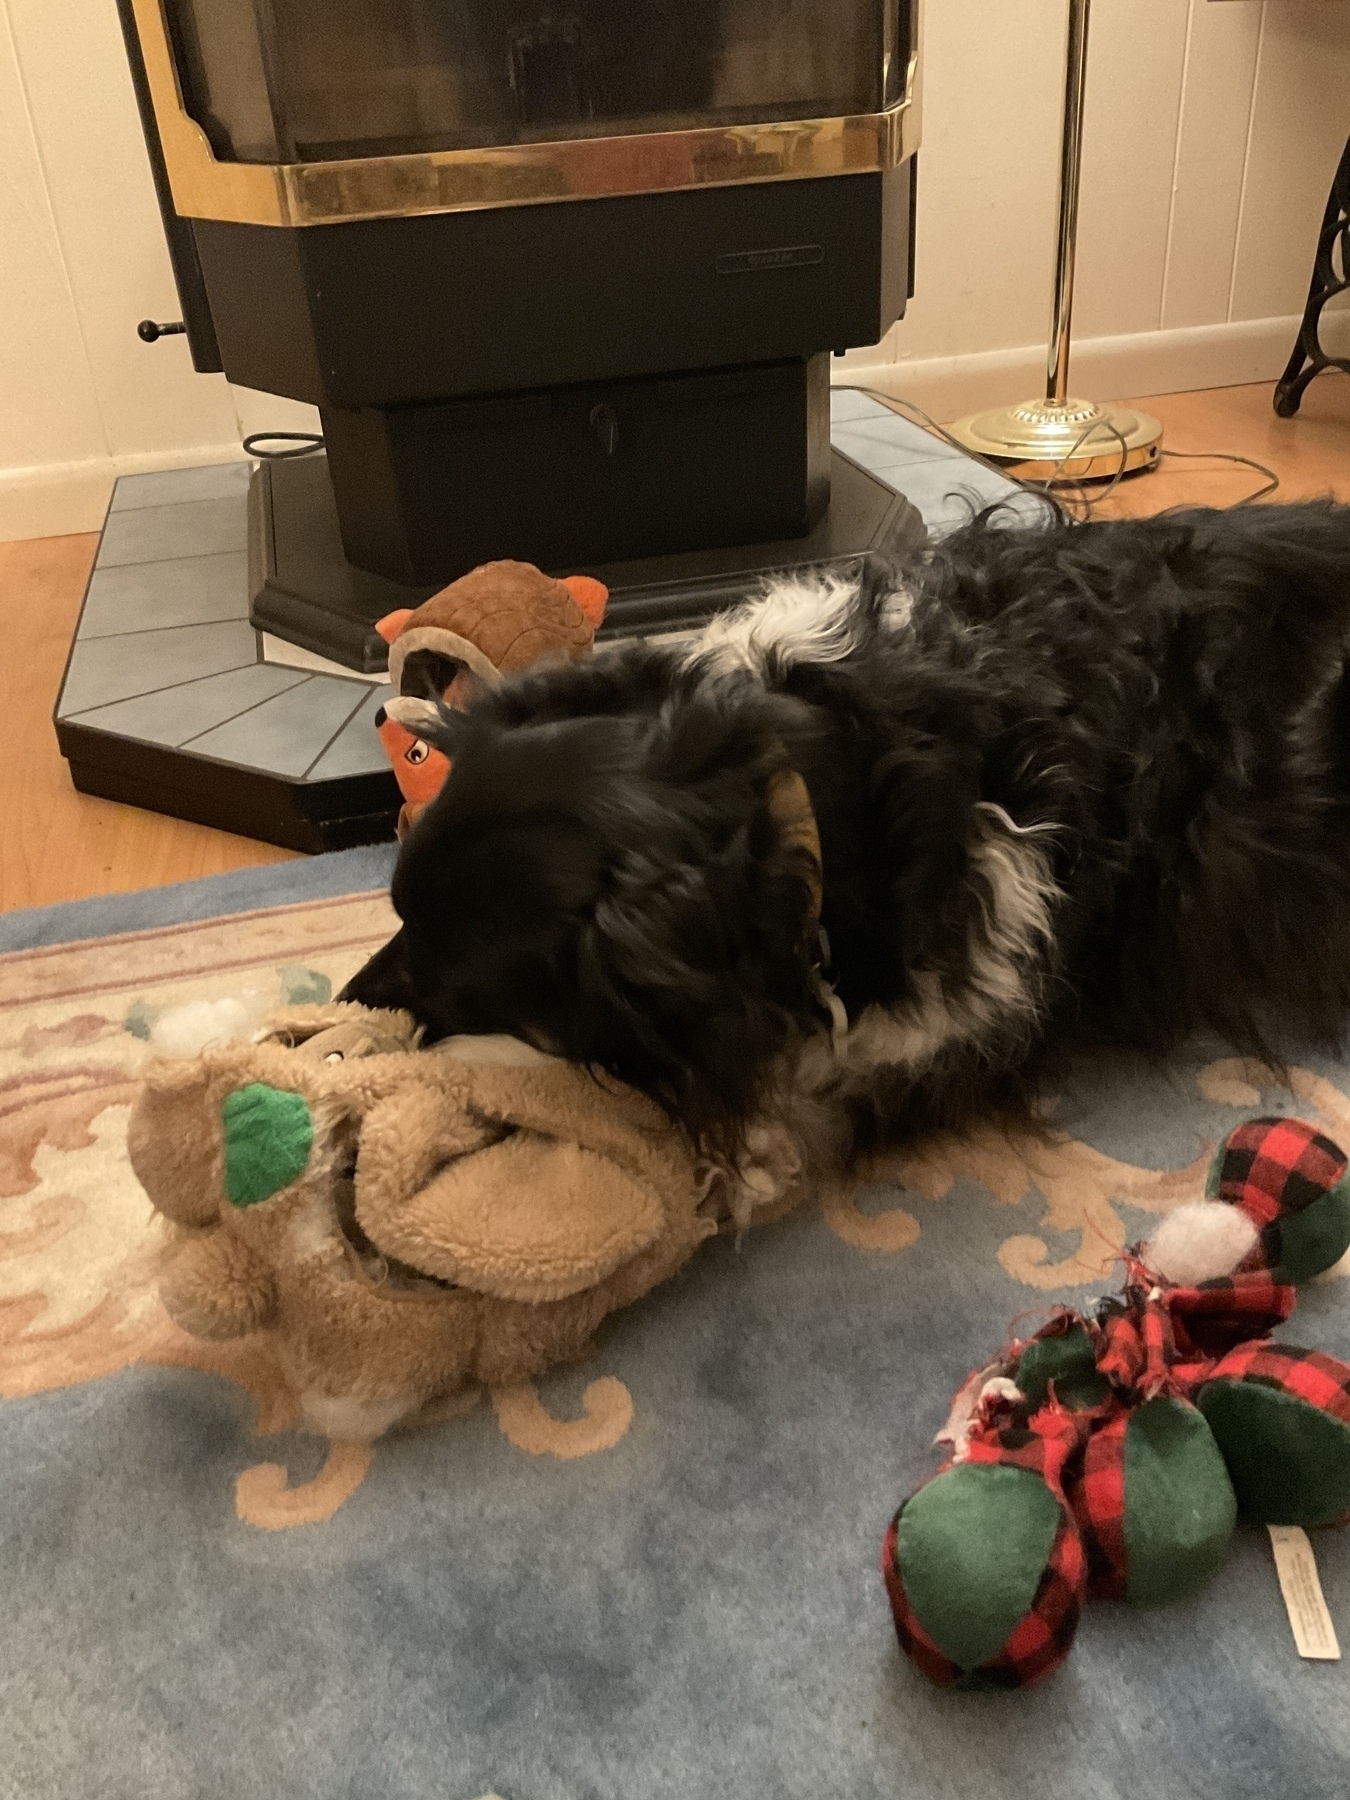 dog with toy